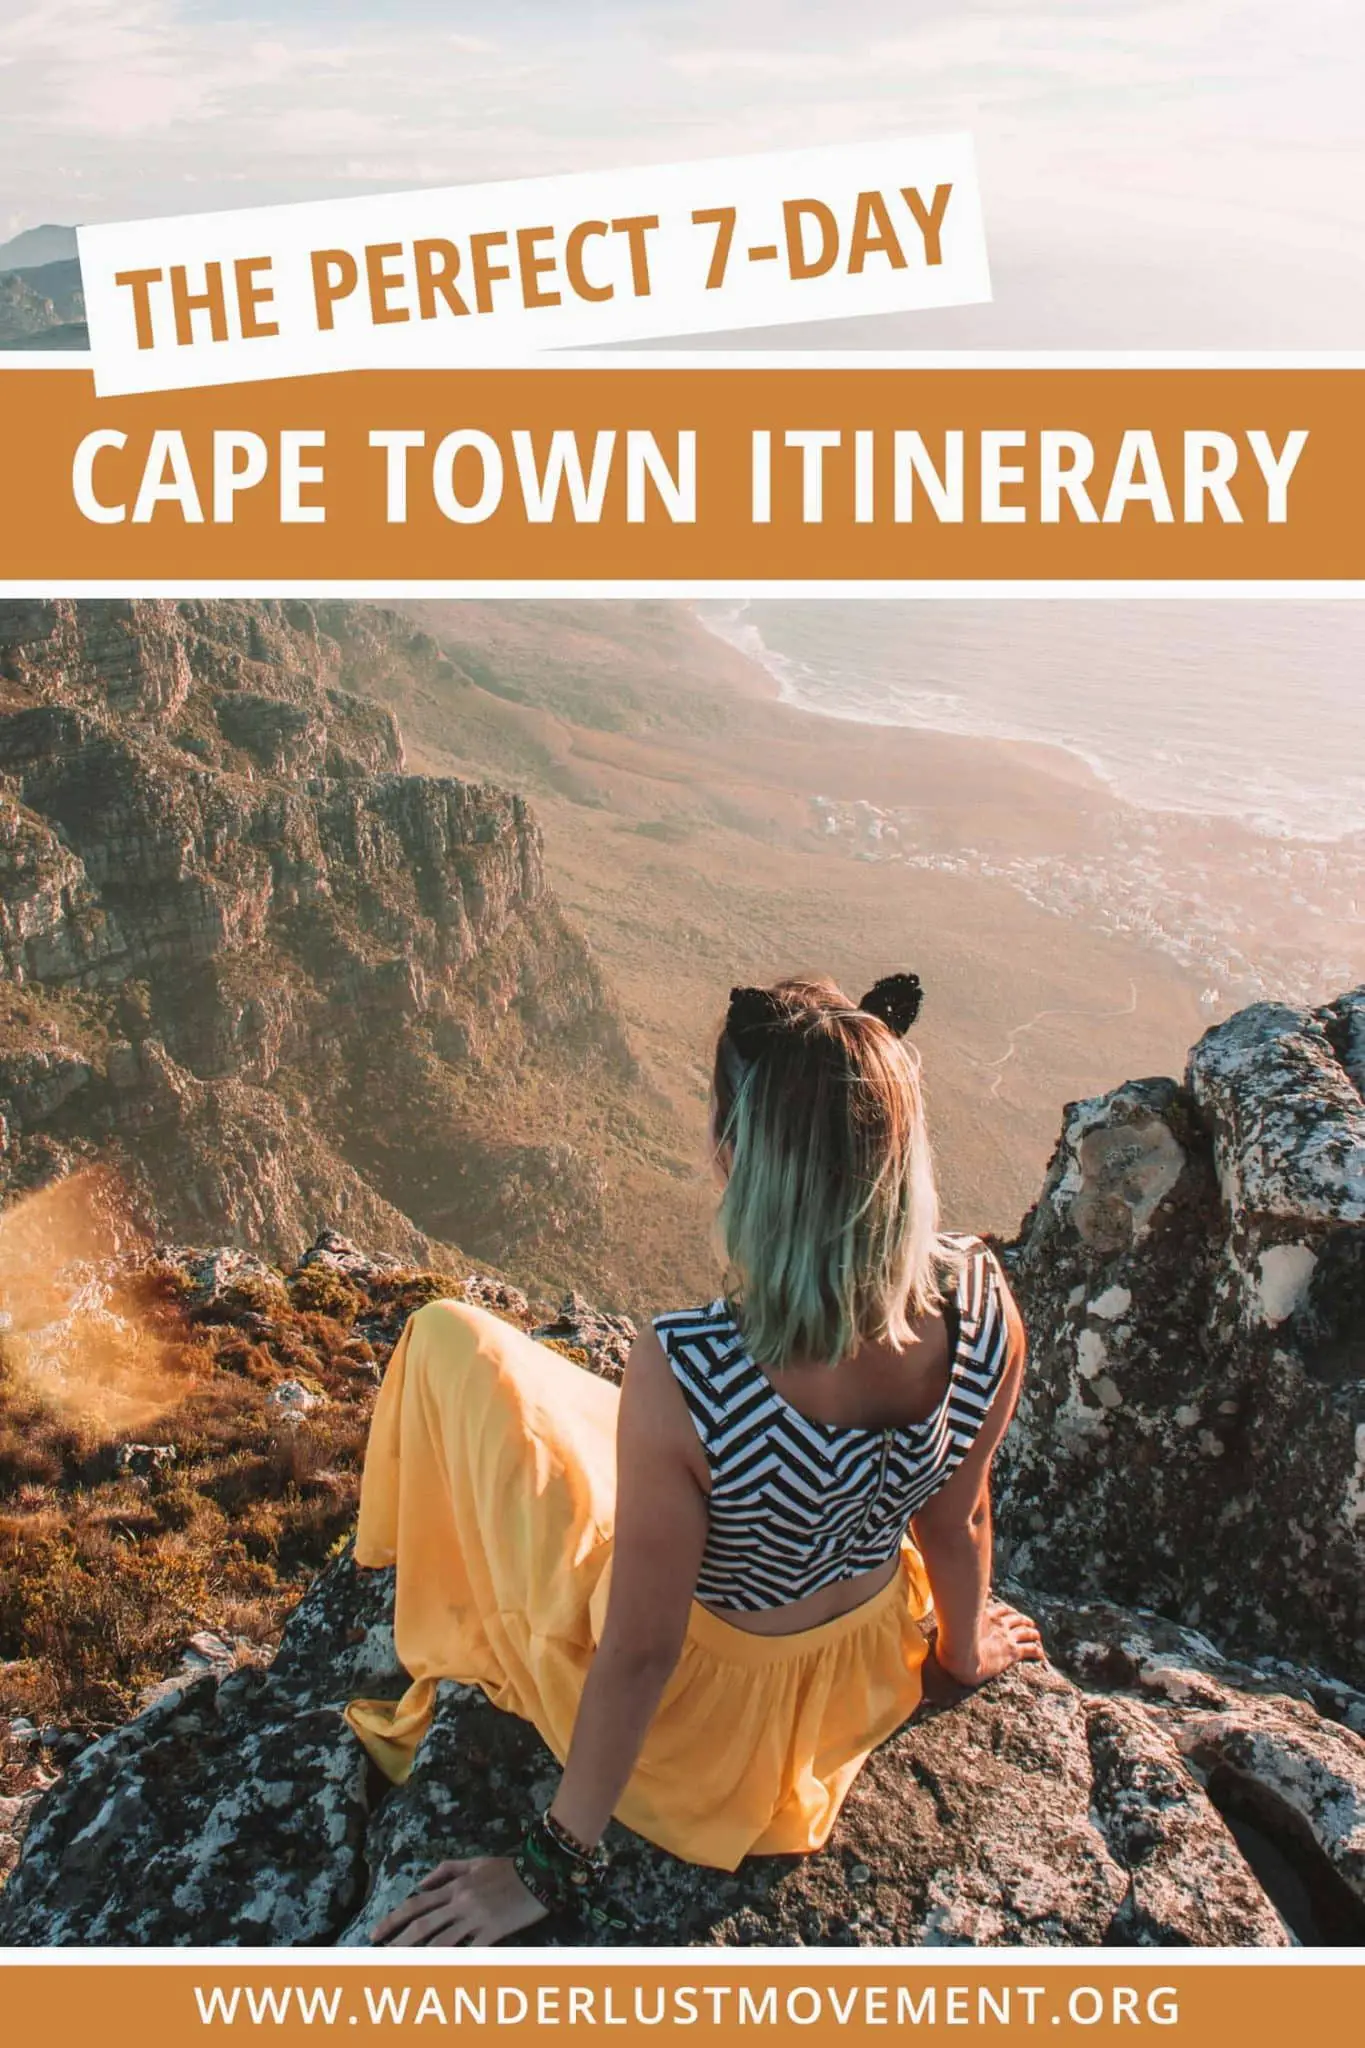 The Perfect Cape Town Itinerary for One Incredible Week